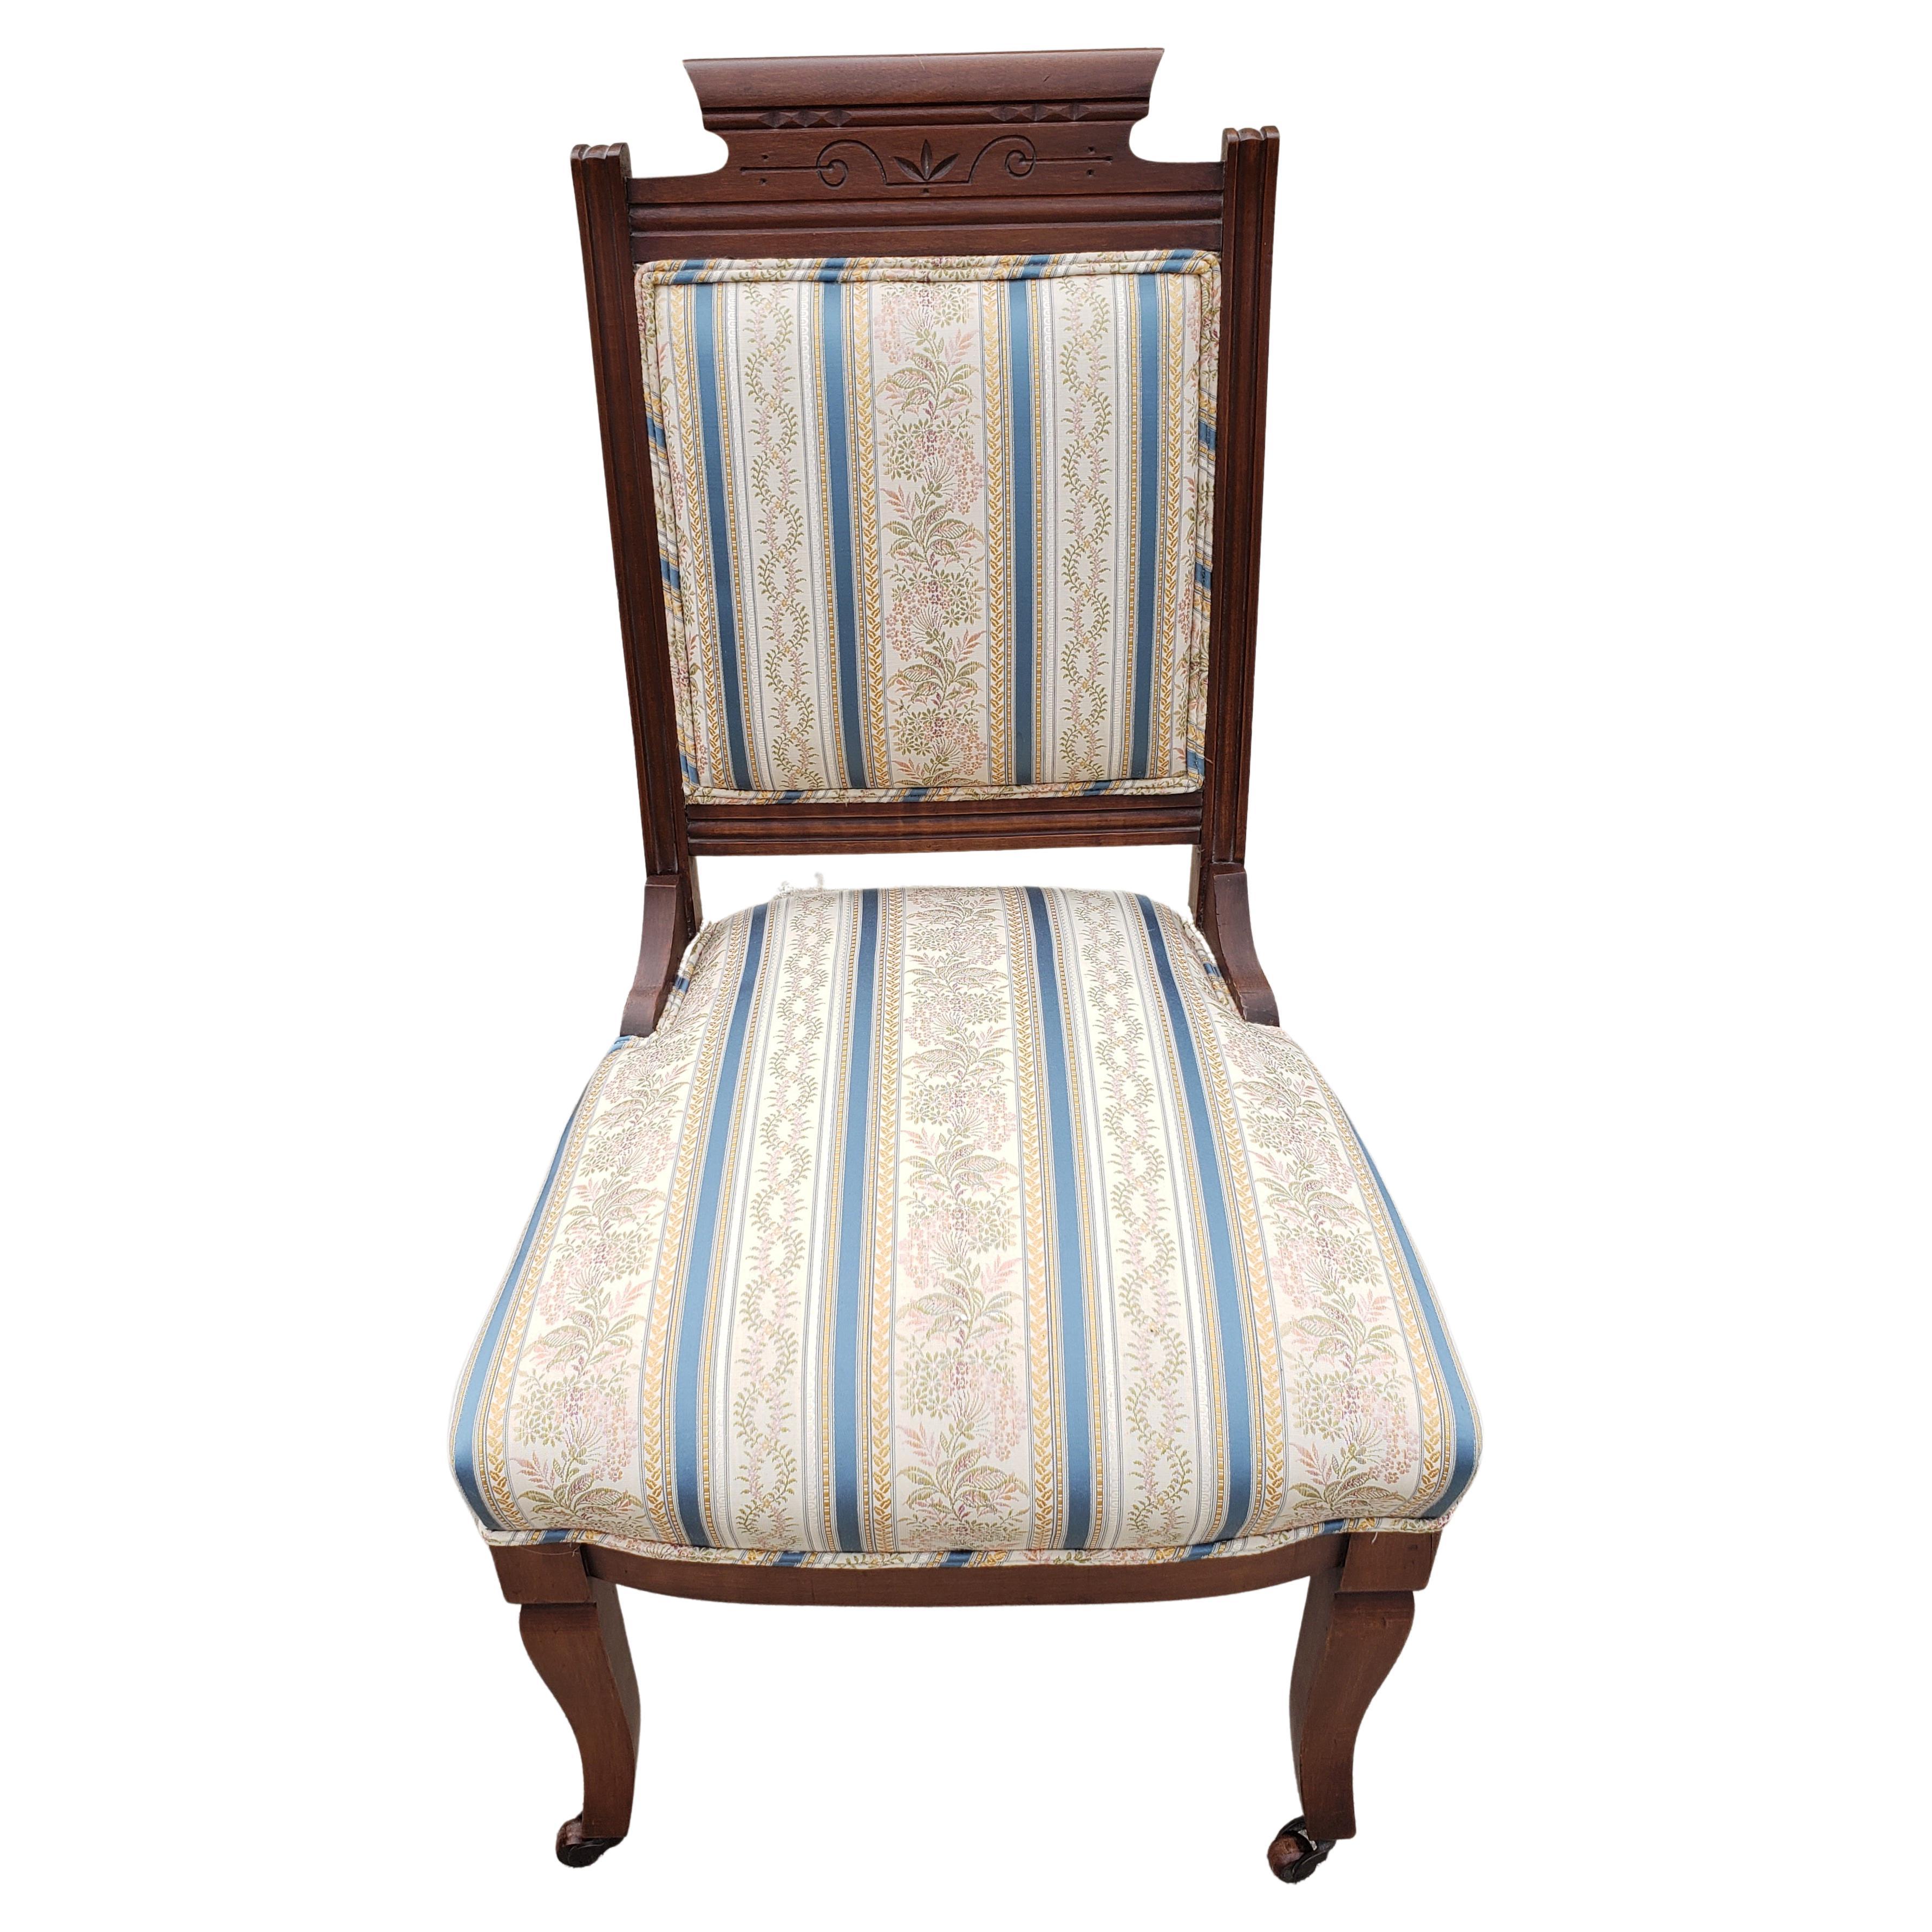 Antique Eastlake Parlor chair from the Victorian Era approximately the late 1880's - 1890's with original wood front wheels. Very Good Condition. Professionally Re-Upholstered a few years ago. Seat is firm and upholstery in very good shape and